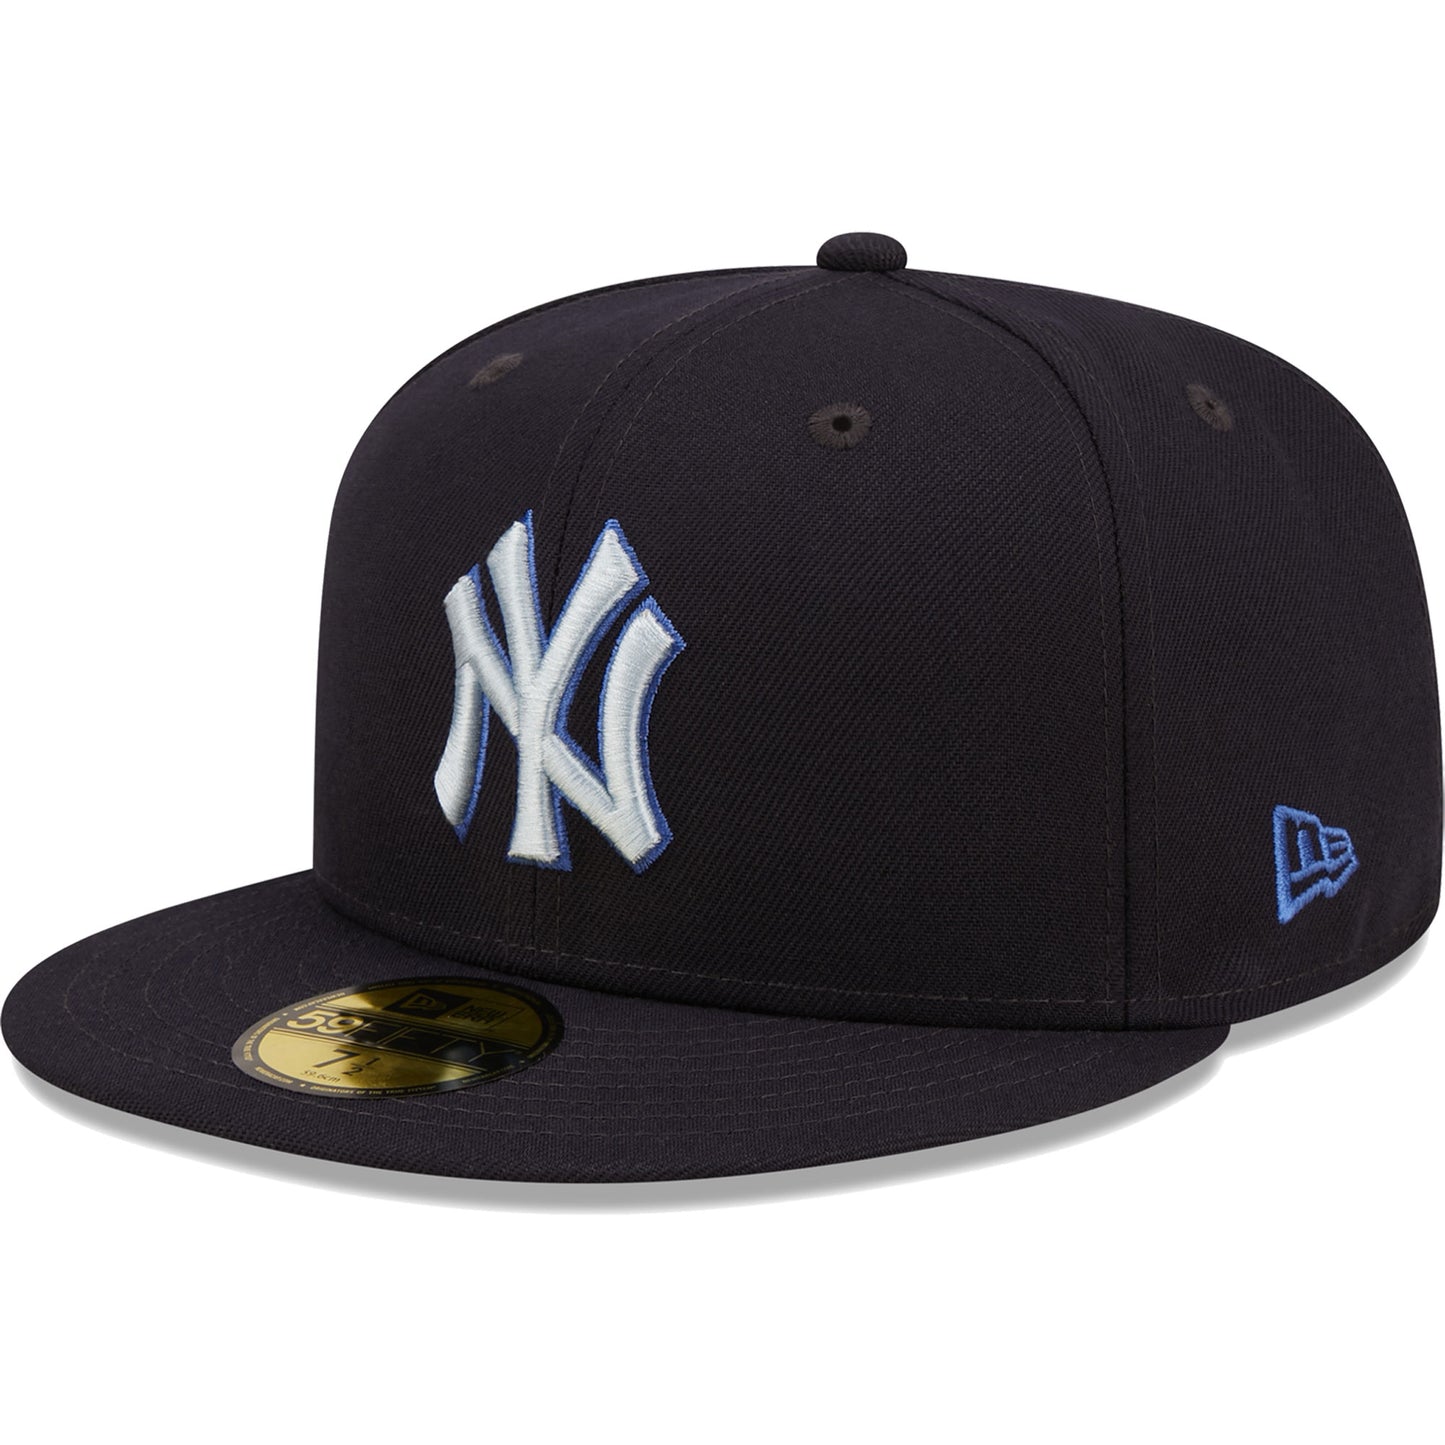 New York Yankees New Era Monochrome Camo 59FIFTY Fitted Hat - Navy